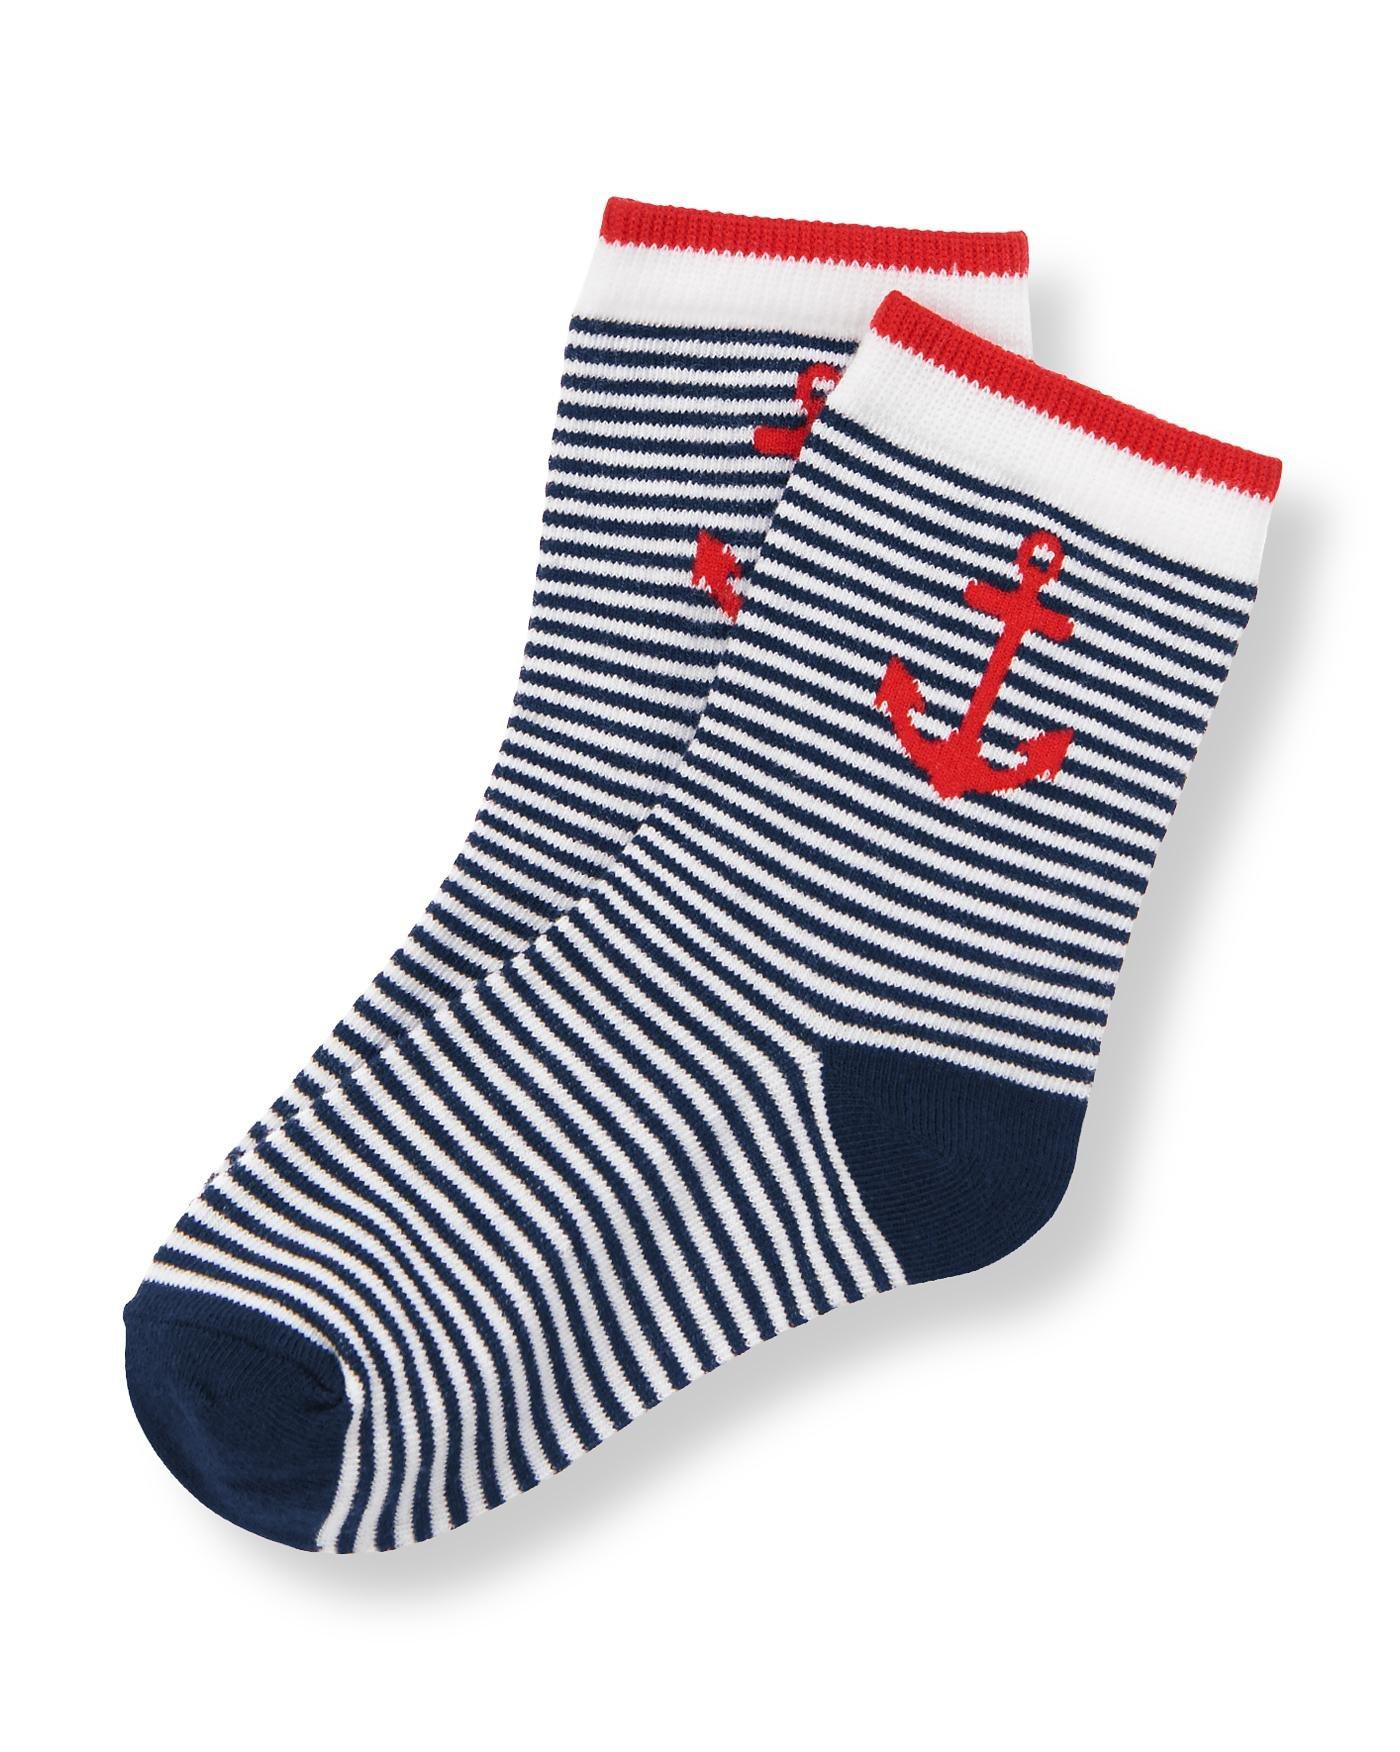 Anchor Striped Sock image number 0